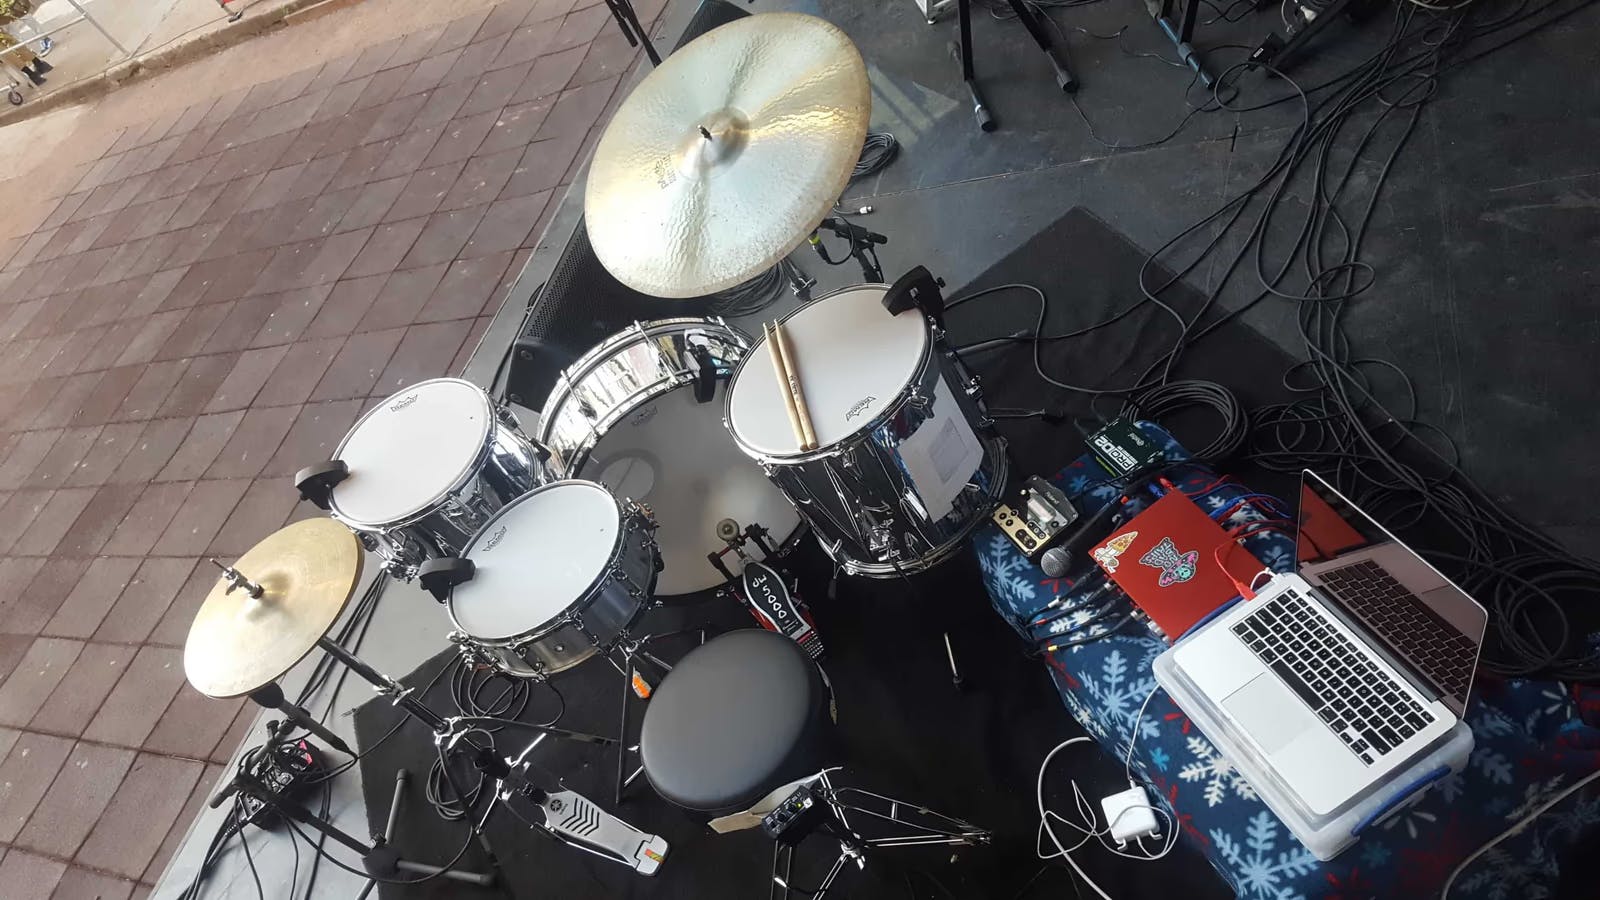 A picture of a Sensory Percussion equipped drumset (silver shells) with a hi-hat and ride cymbal and an audio interface and a few other electronics